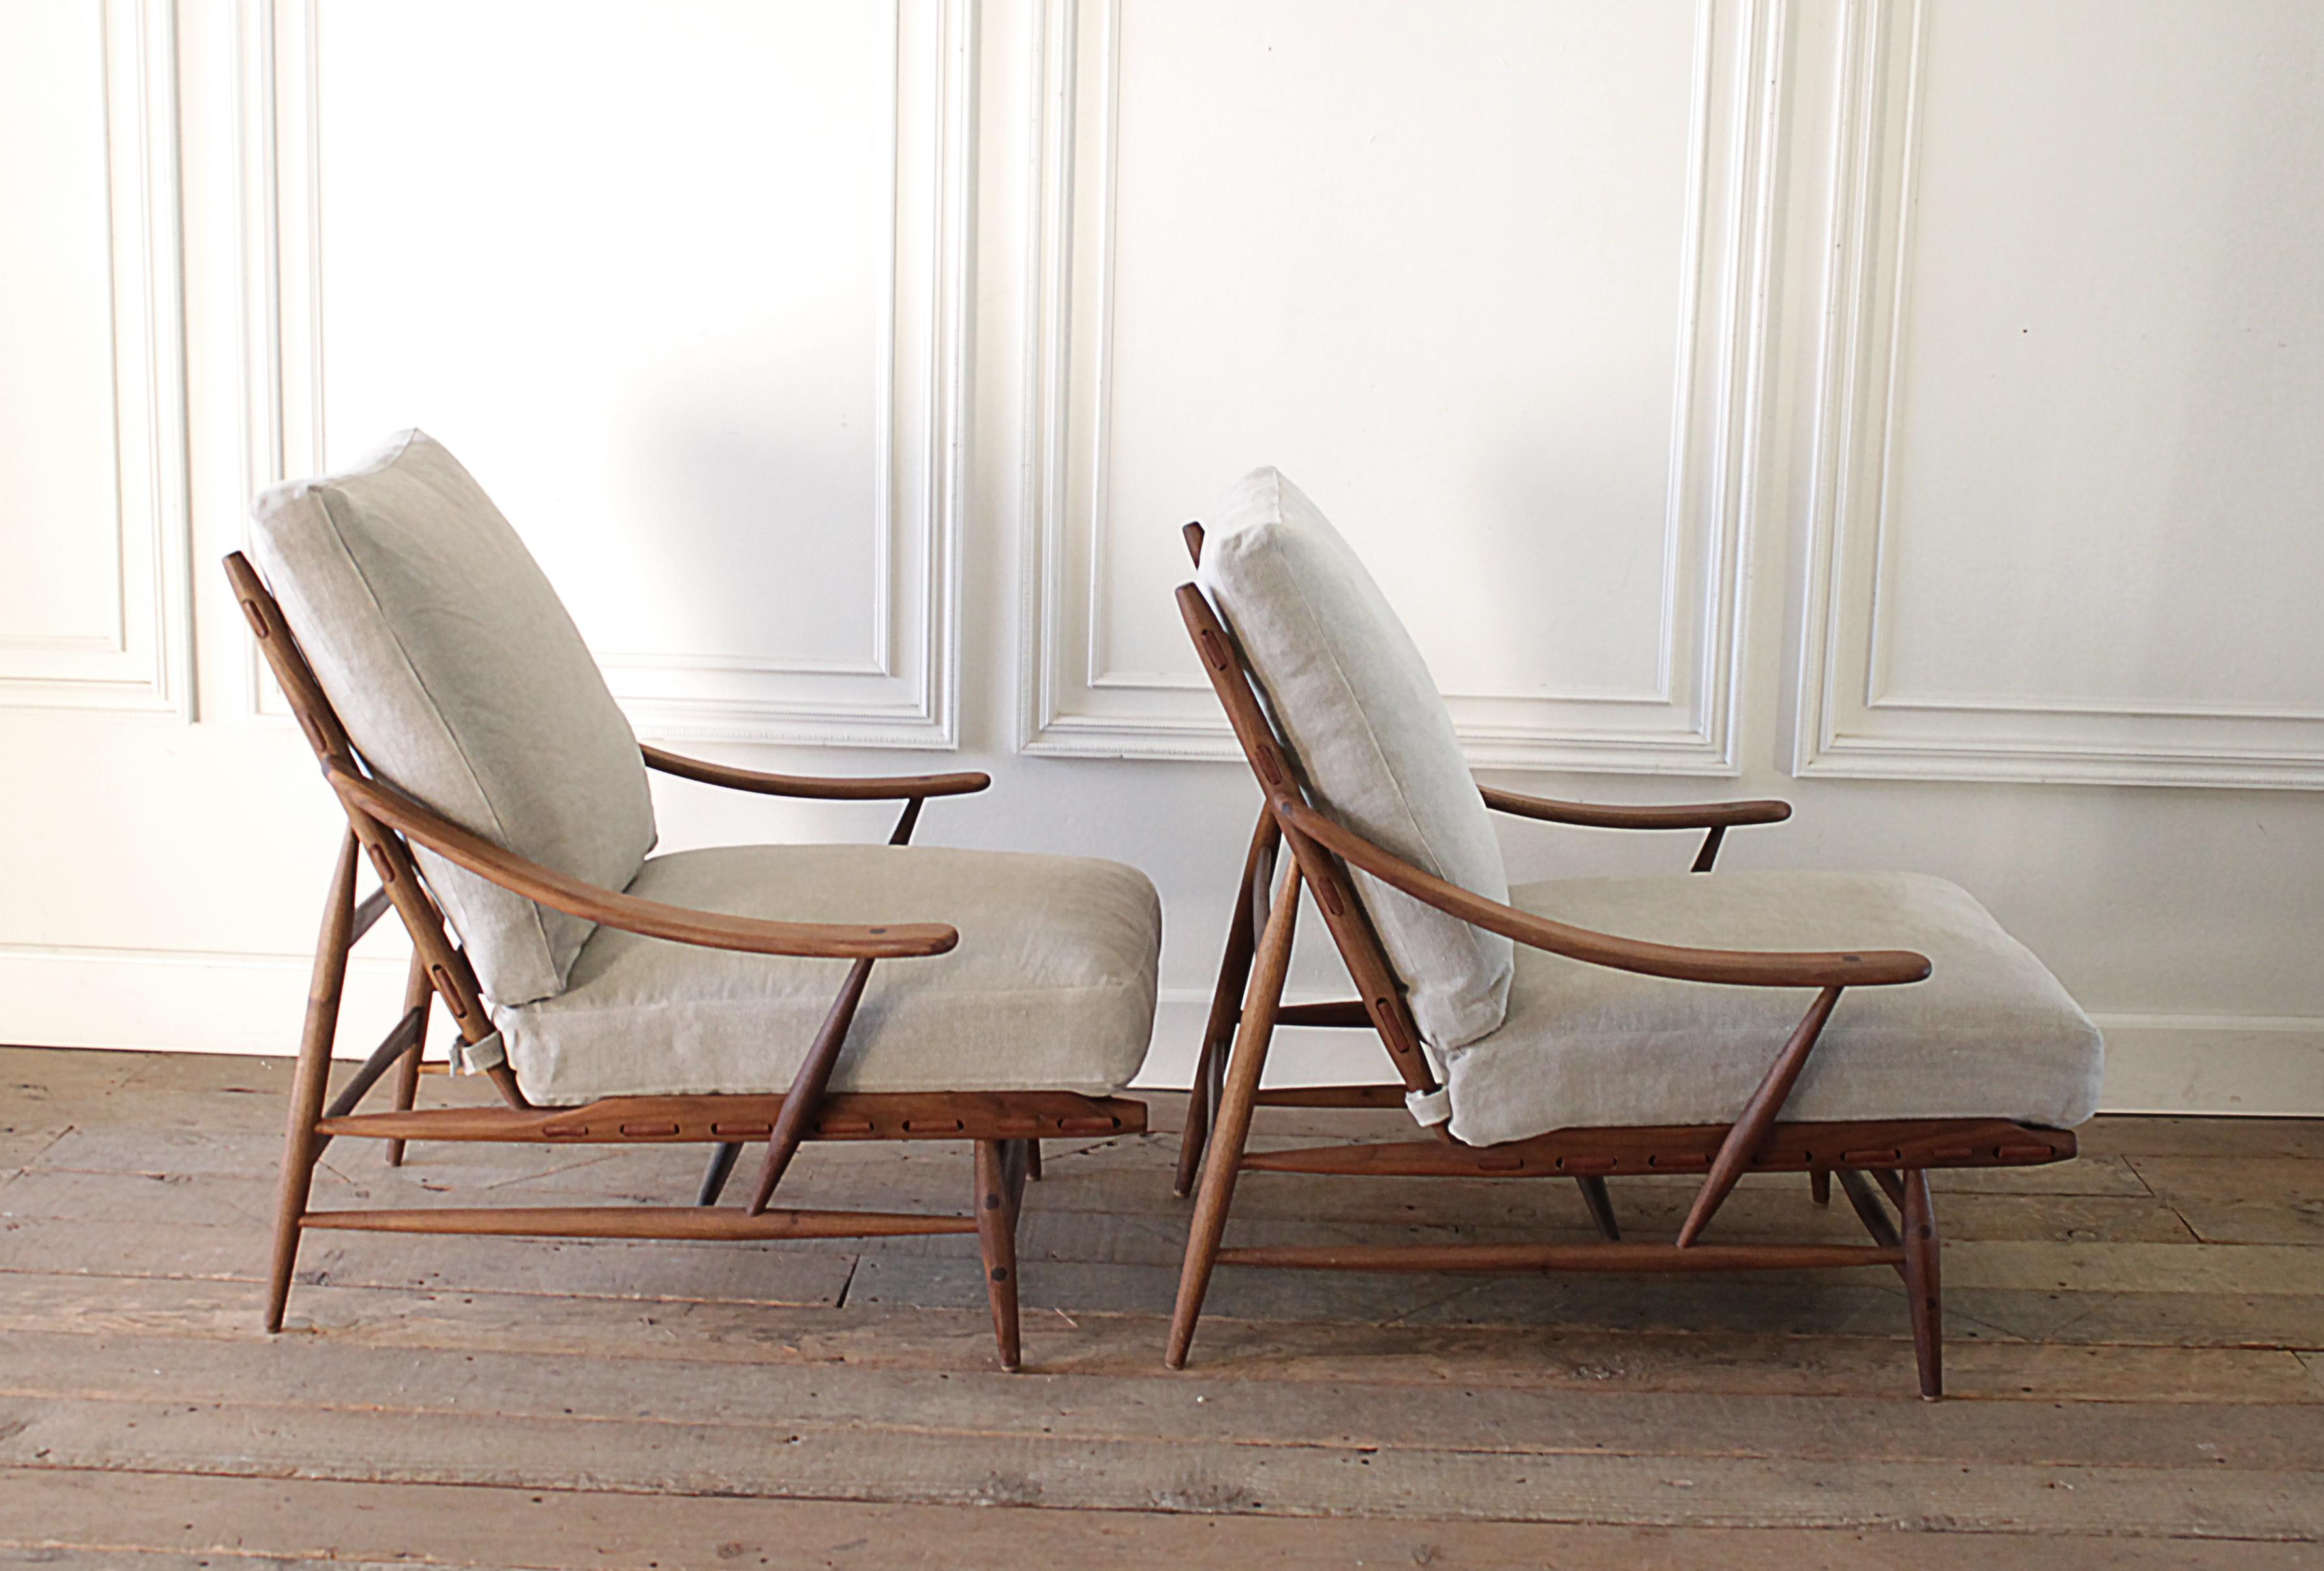 North American Pair of Mid-Century Modern Style Lounge Chairs with Stone Washed Linen Cushions